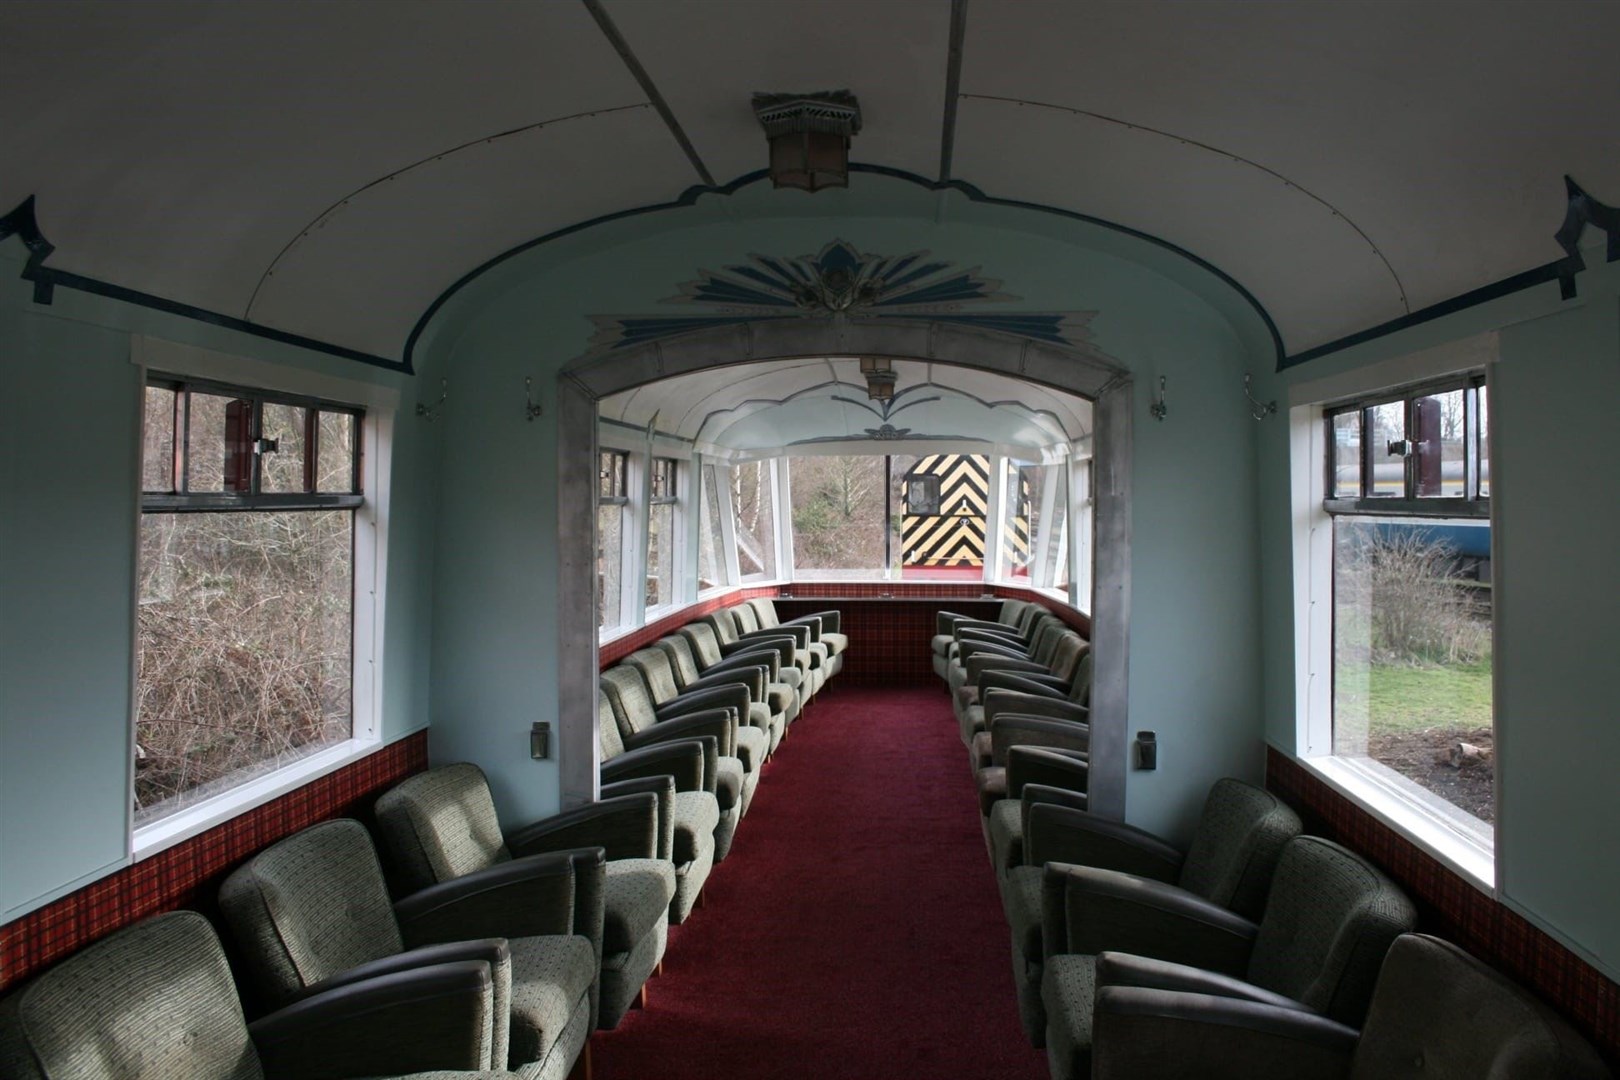 You see it all: that's the beauty of this observation car!